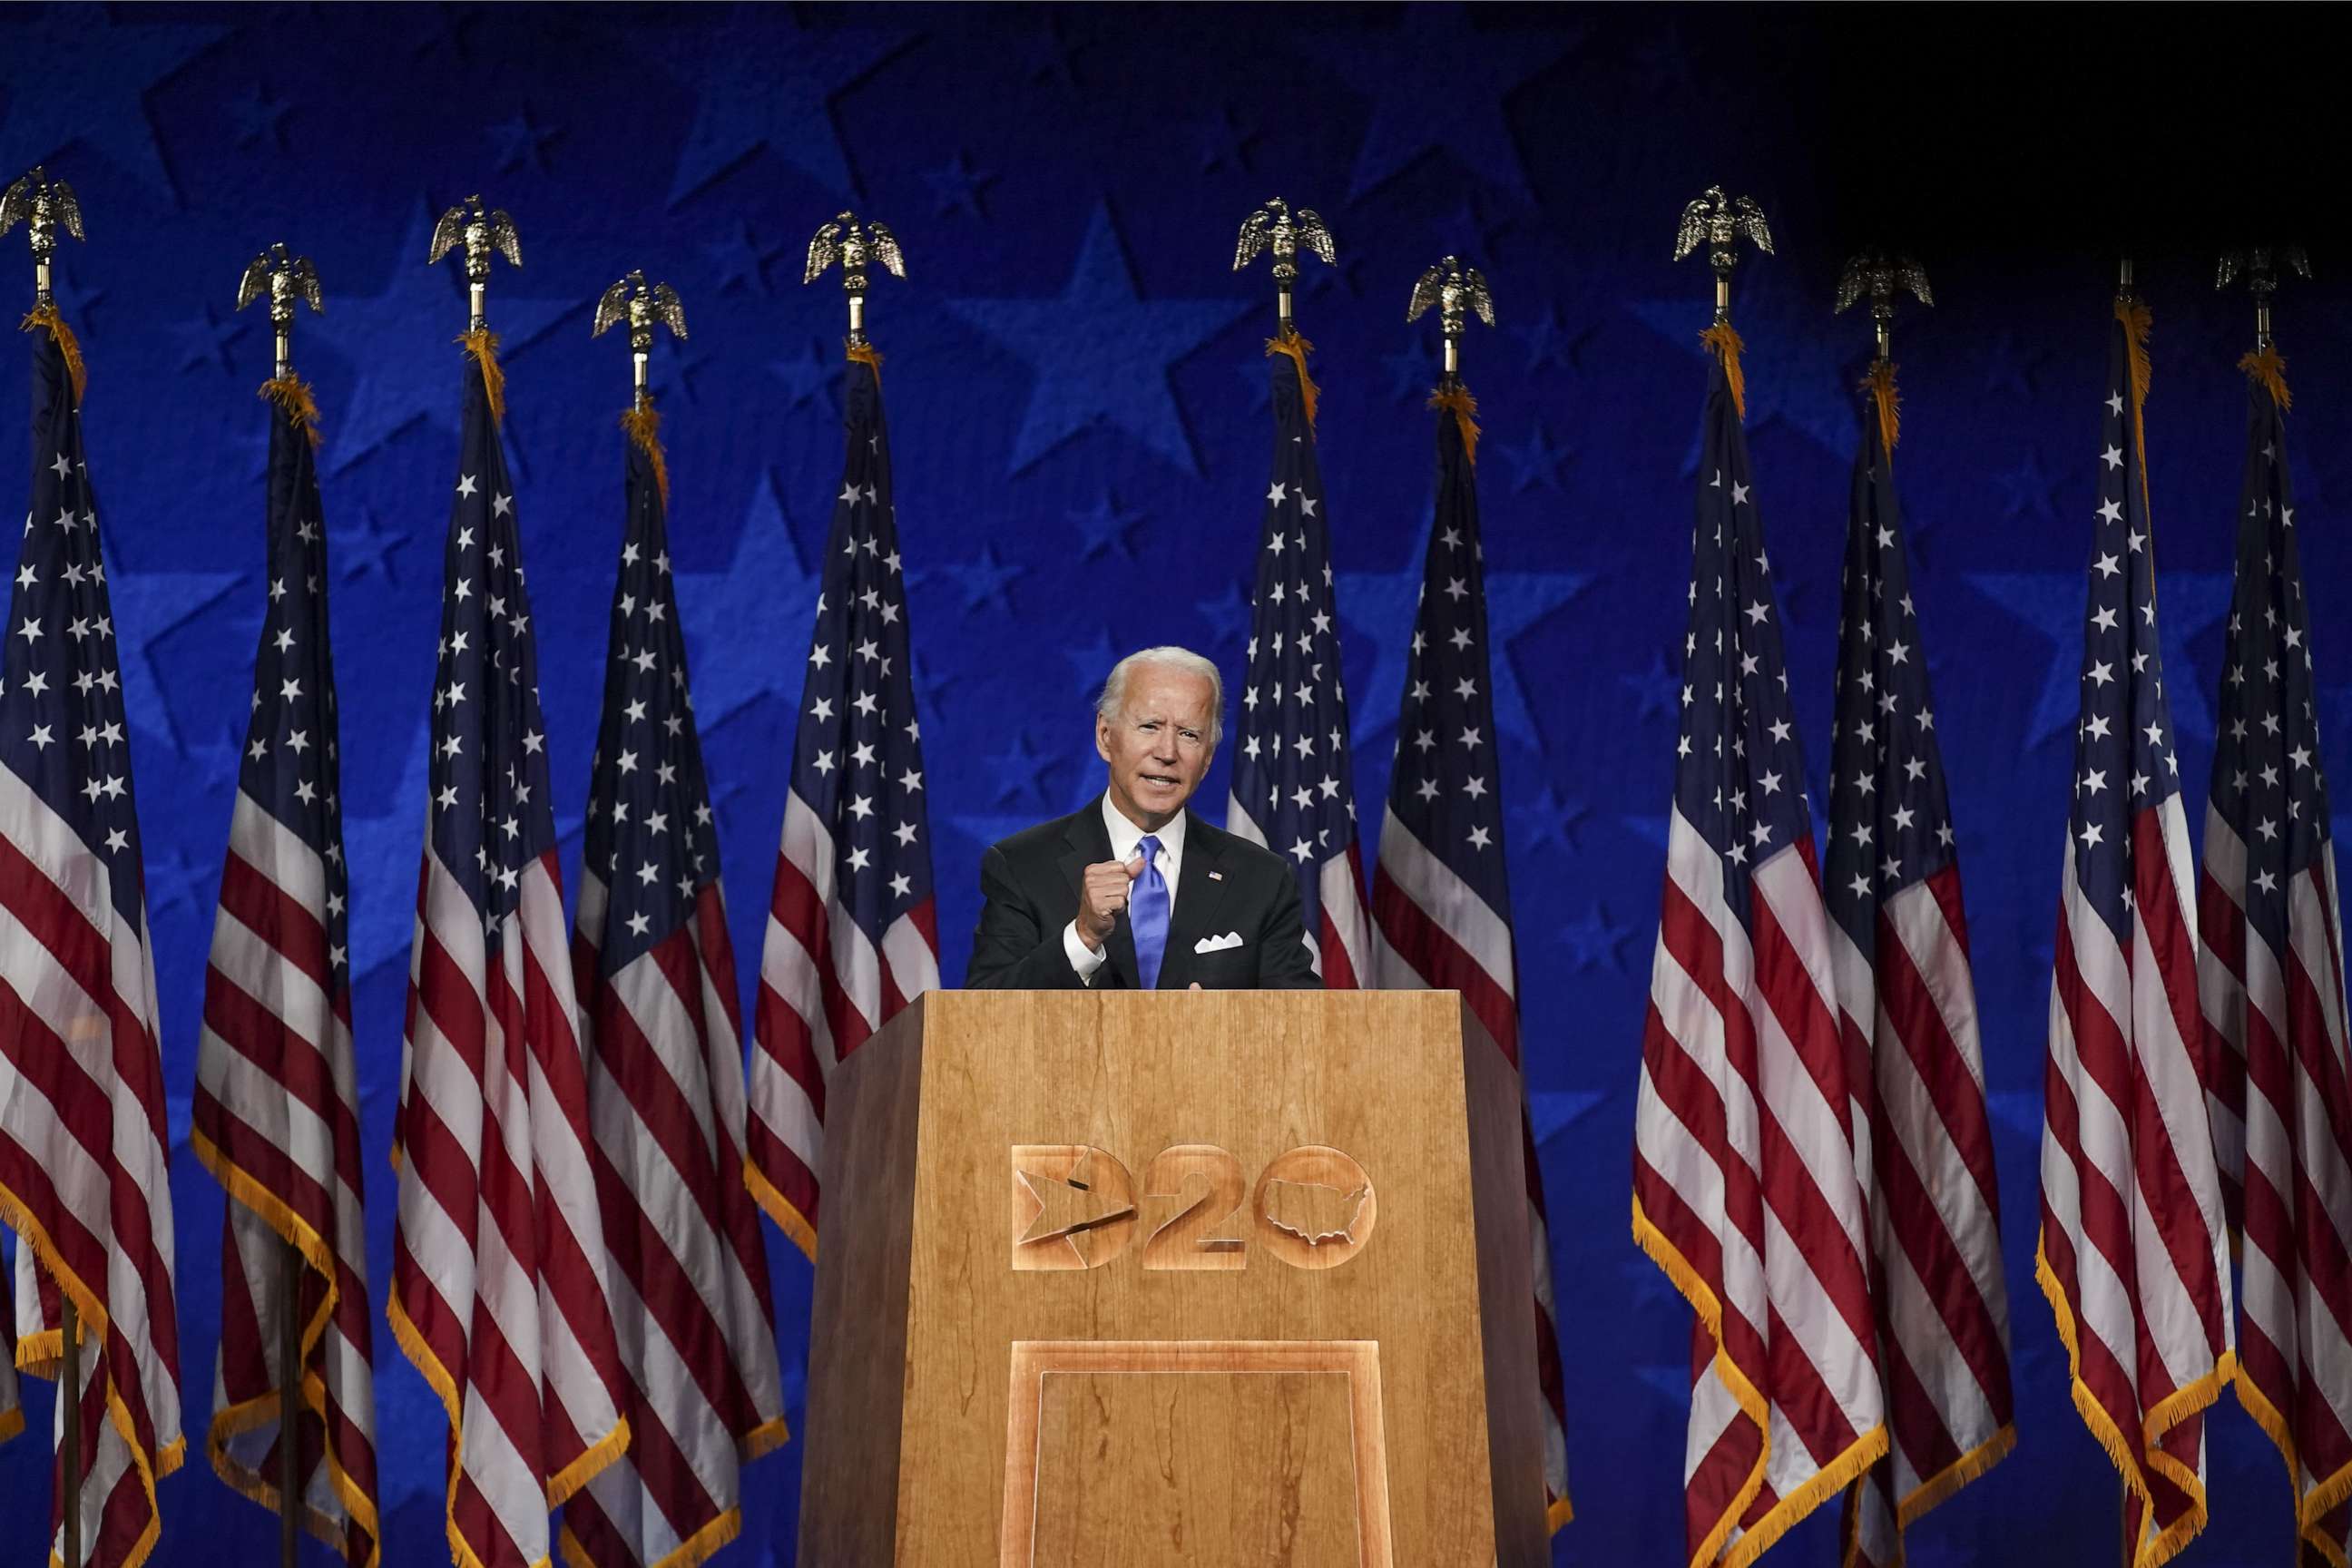 PHOTO: Former Vice President Joe Biden, Democratic presidential nominee, speaks during the Democratic National Convention at the Chase Center in Wilmington, Delaware, Aug. 20, 2020.